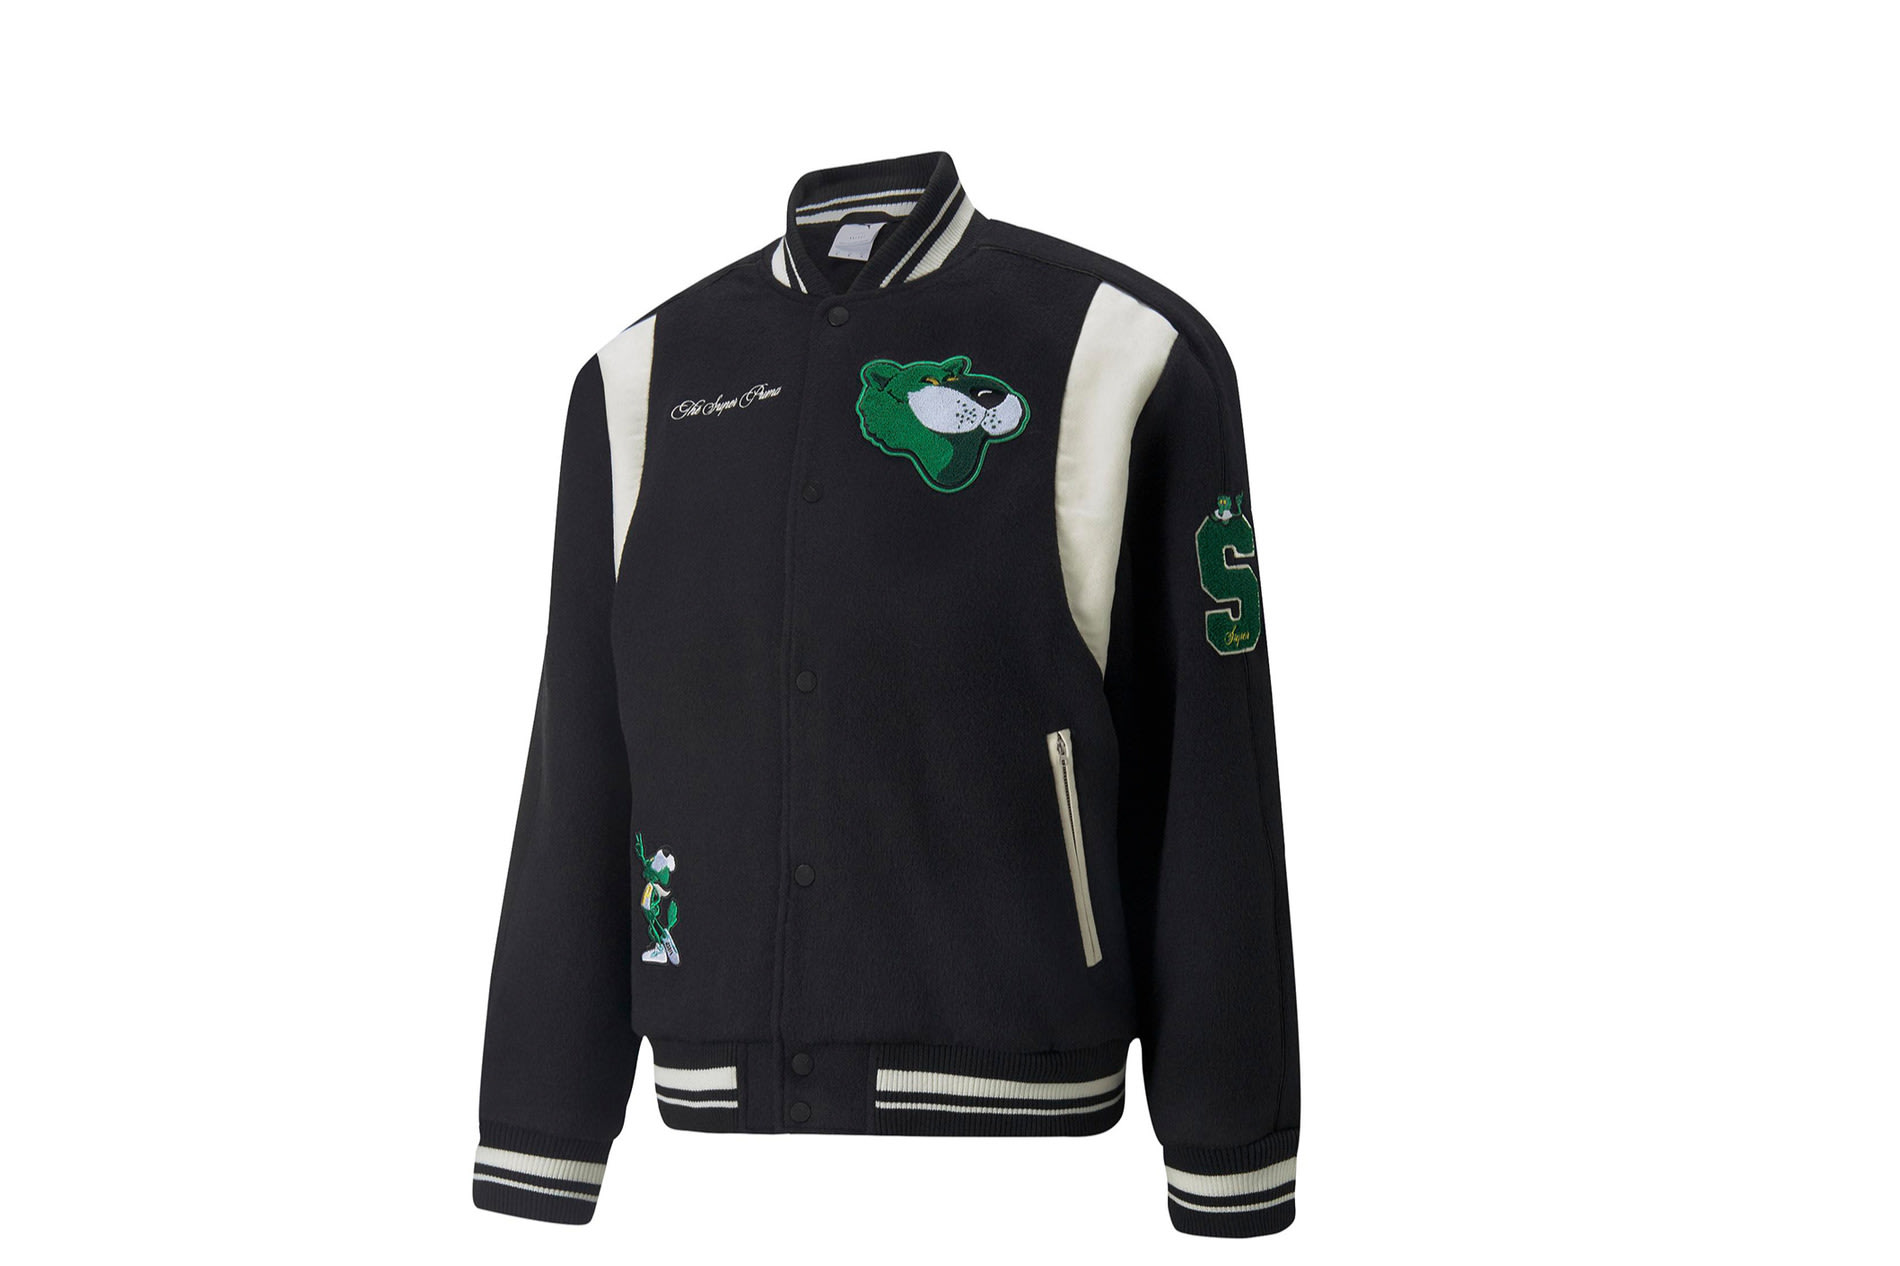 PUMA The Mascot T7 College Jacket Ever in Green for Men